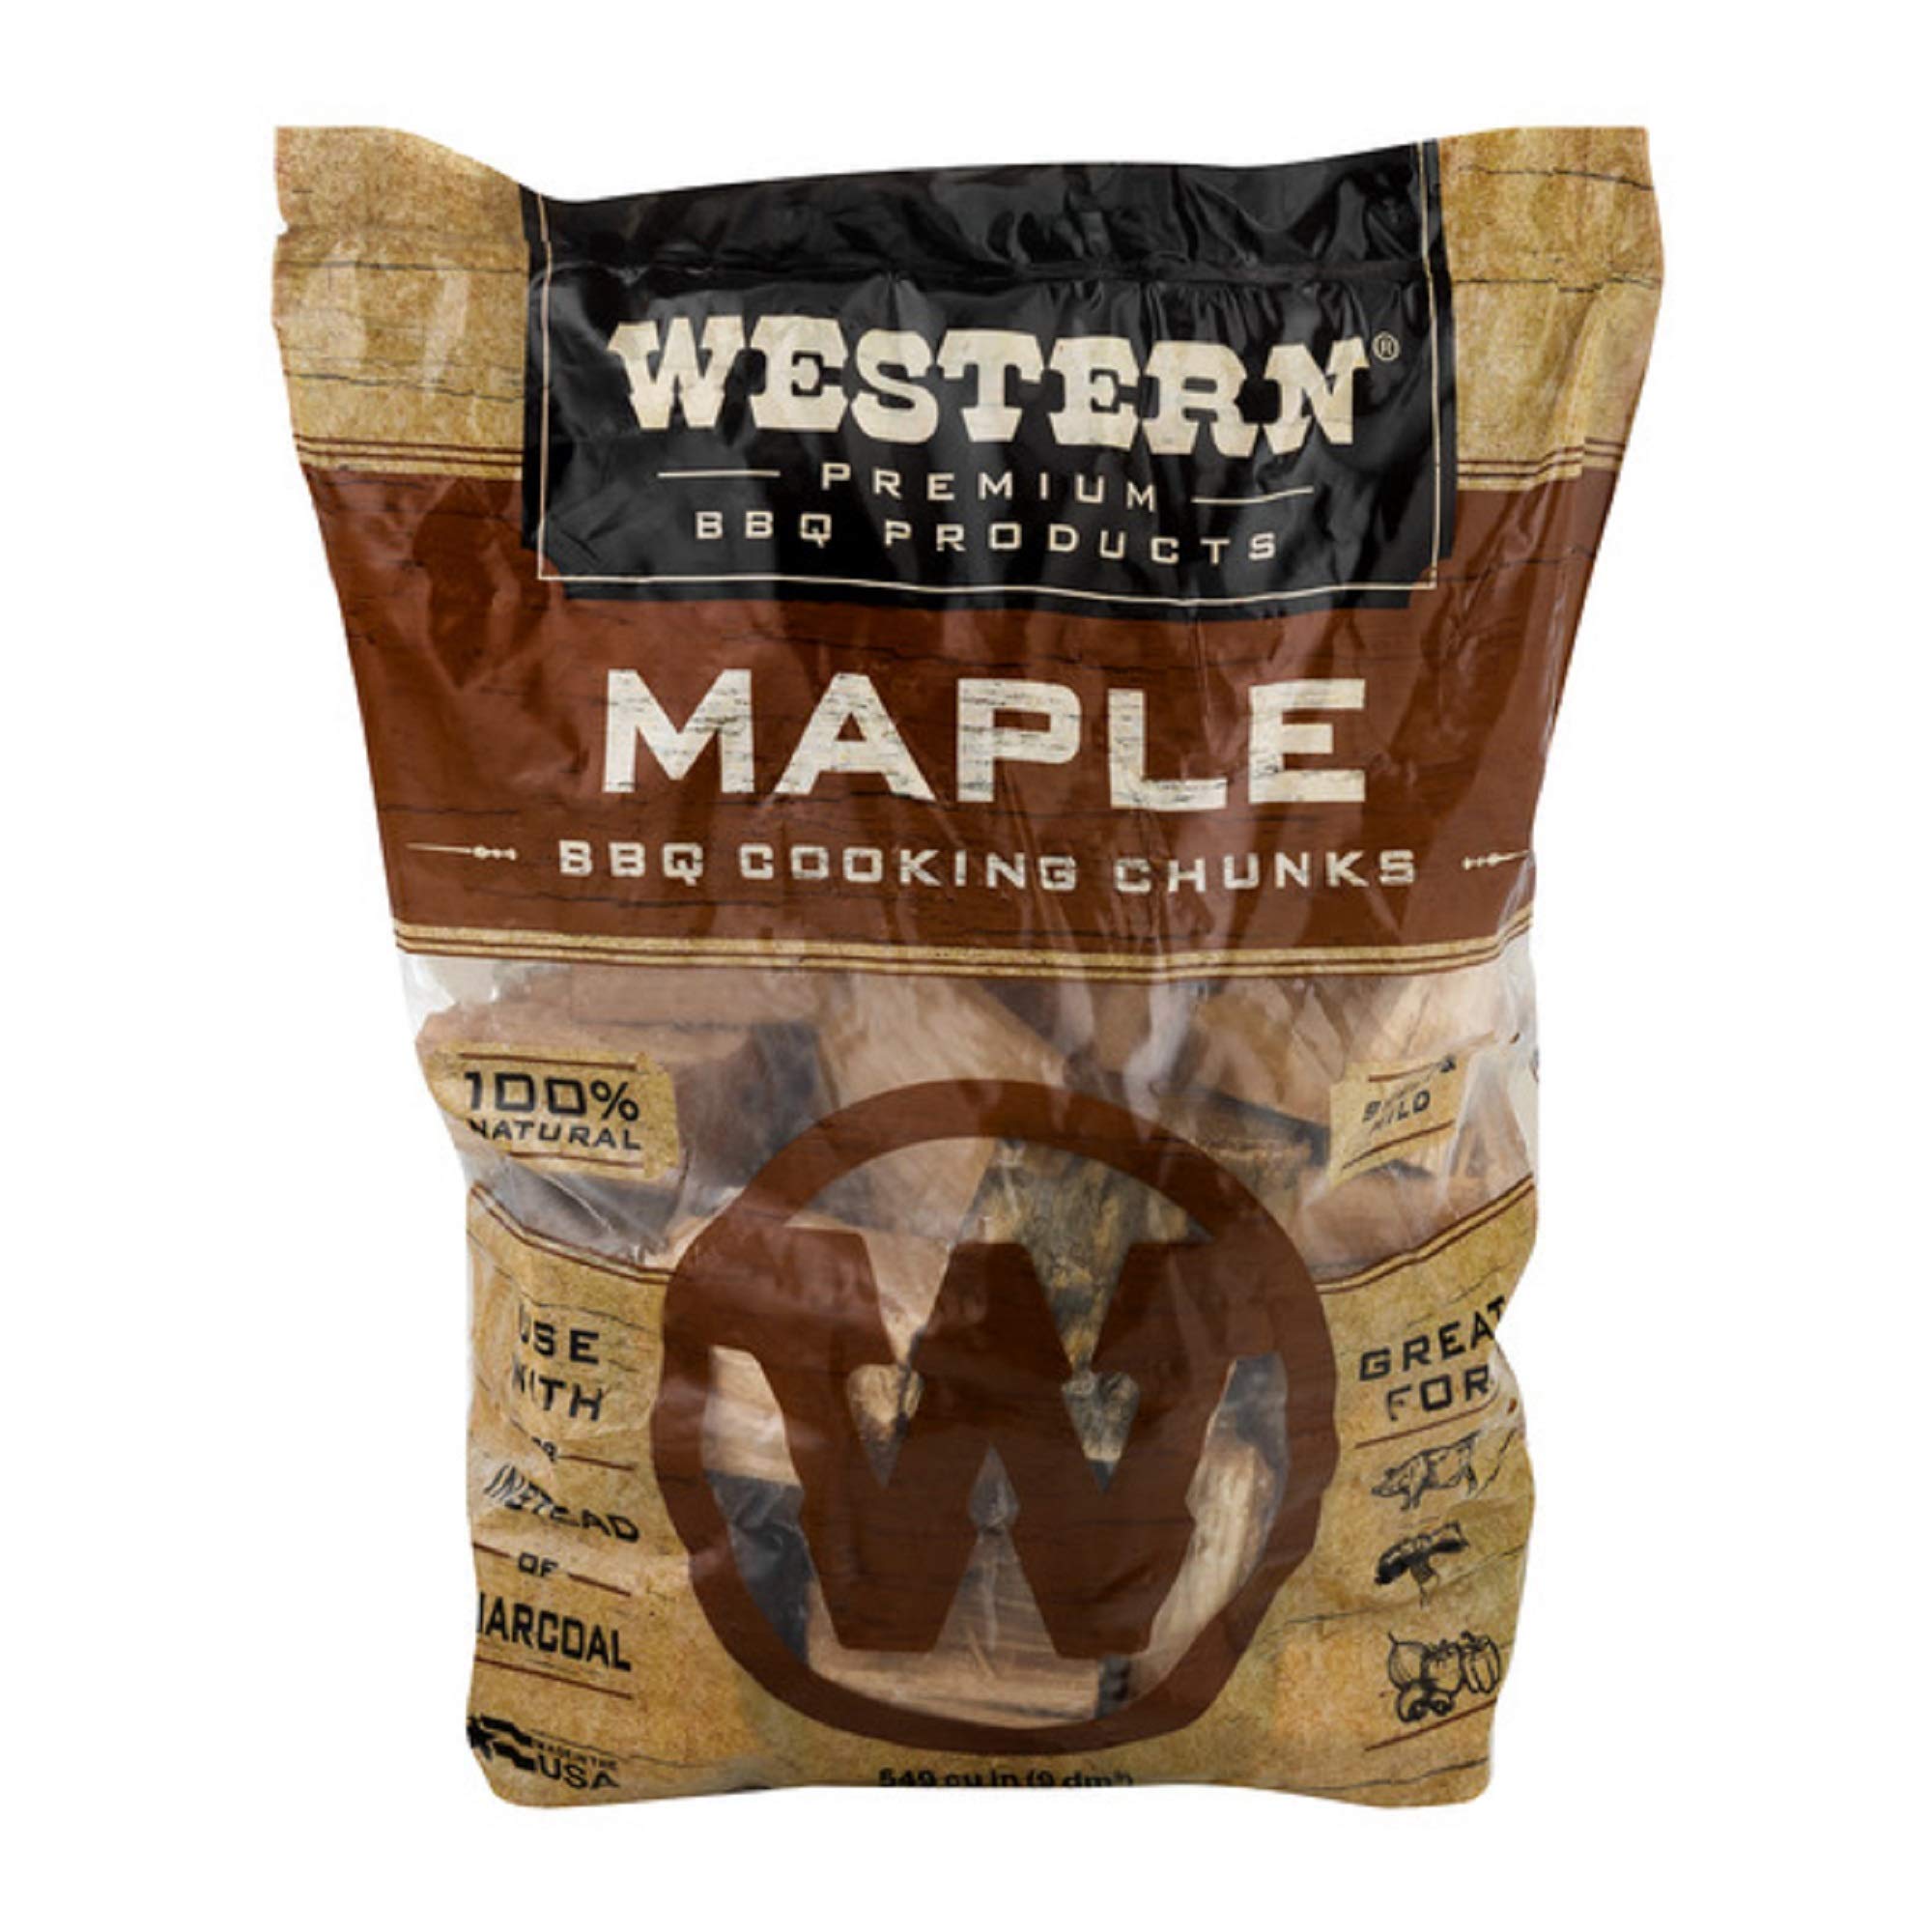 Western Premium BBQ Products Maple BBQ Cooking Chunks, 549 cu in